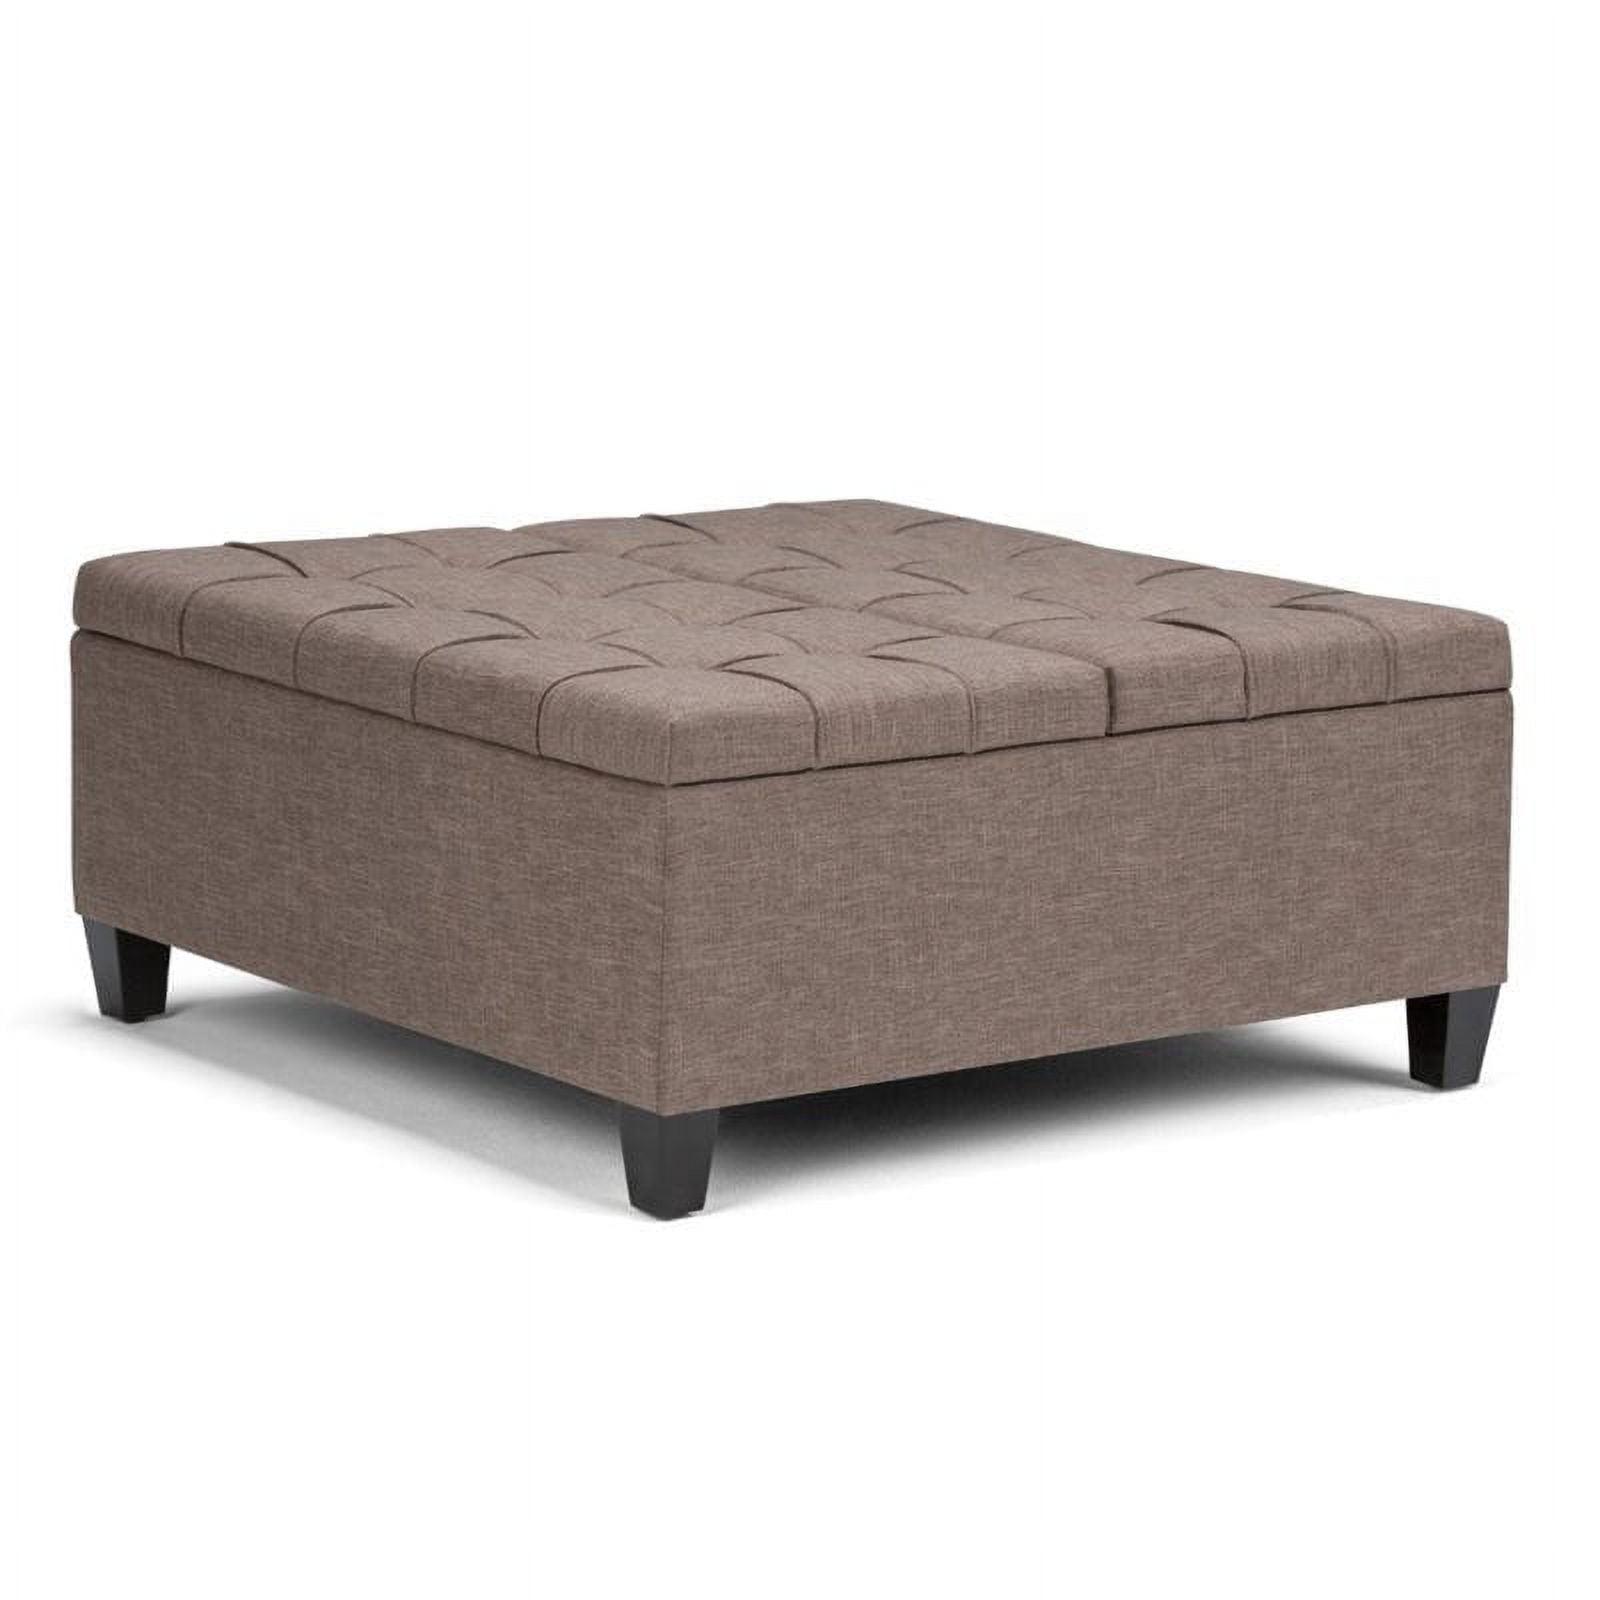 Fawn Brown Linen Tufted 36" Square Storage Ottoman